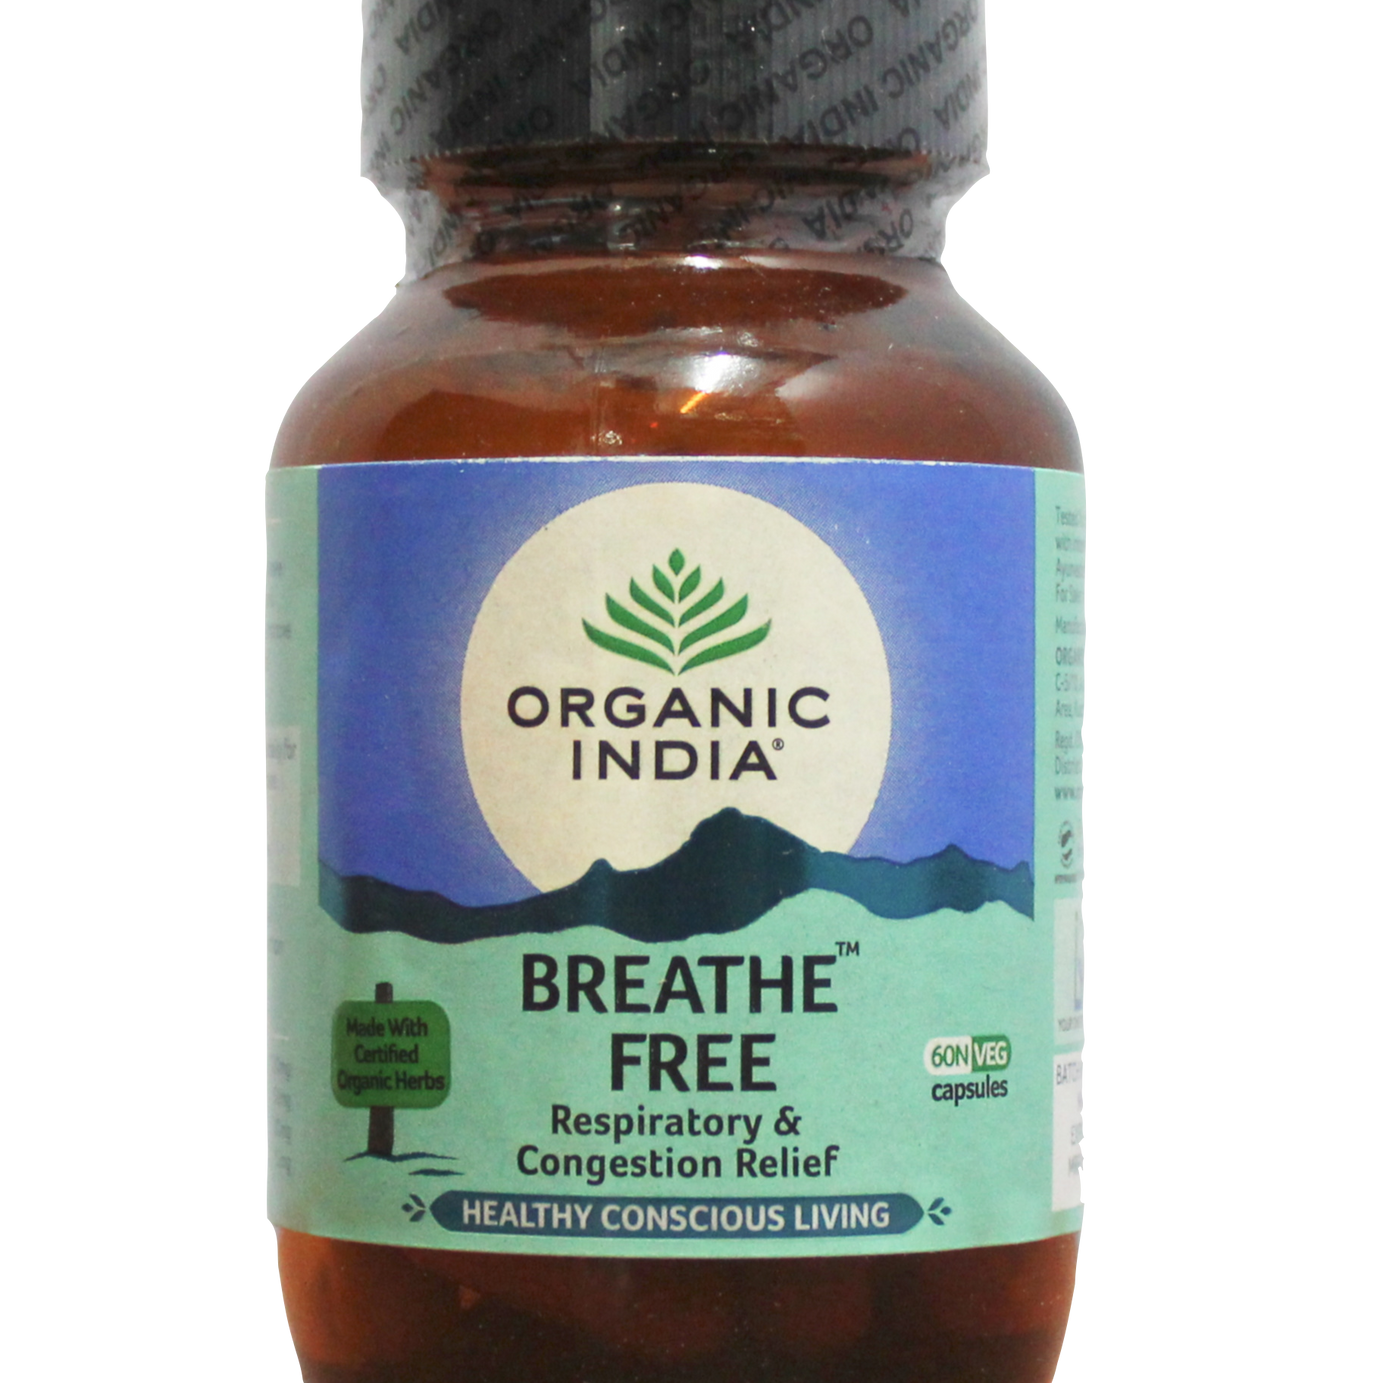 Shop Breathe free capsules - 60capsules at price 225.00 from Organic India Online - Ayush Care